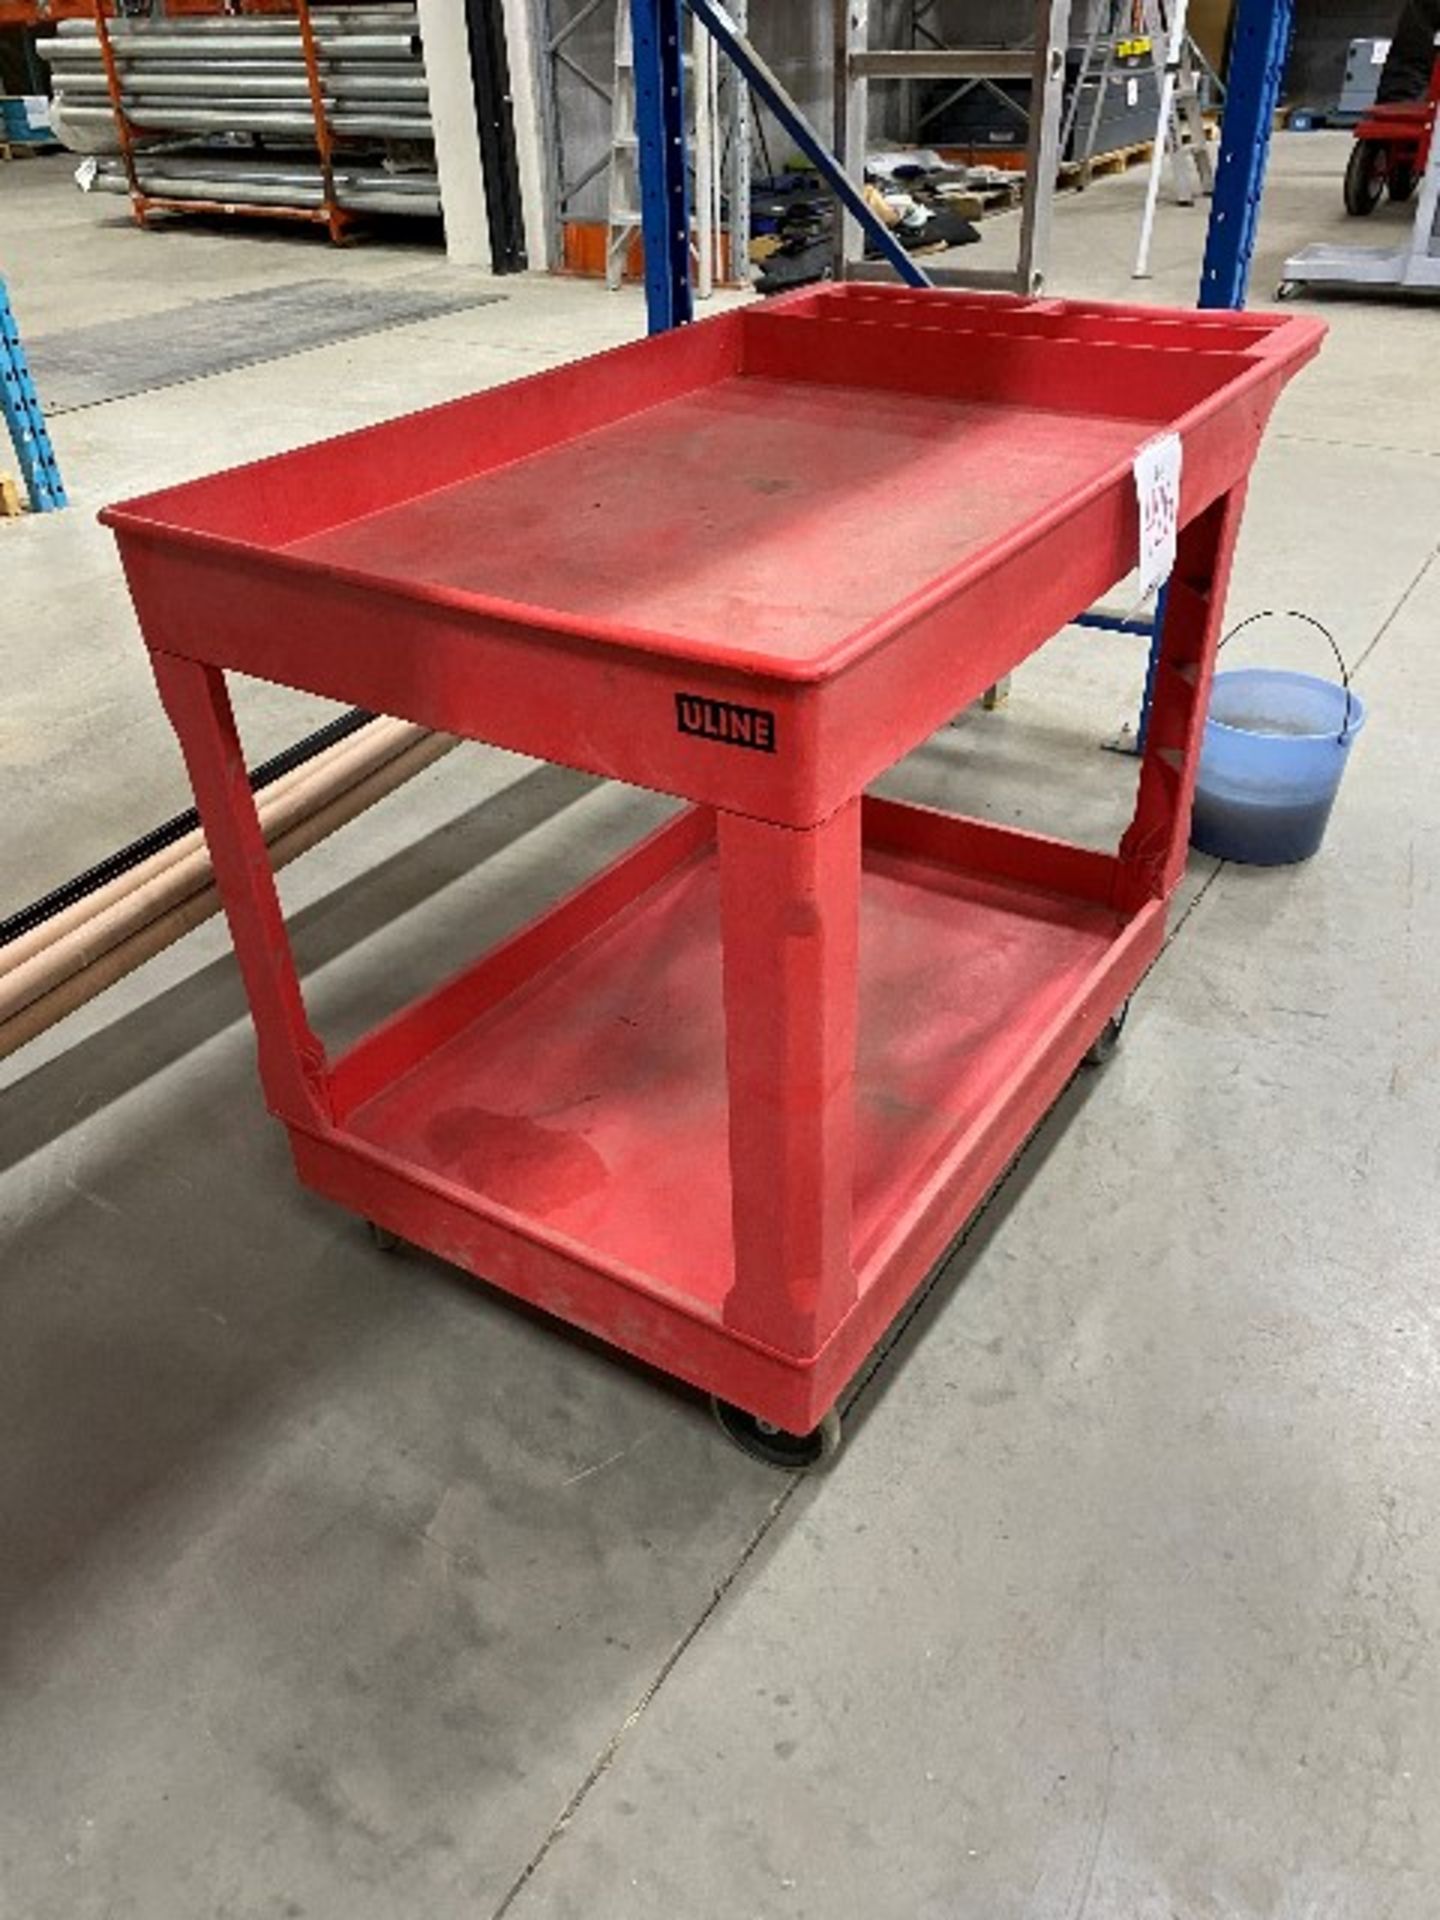 Uline mobile cart, red